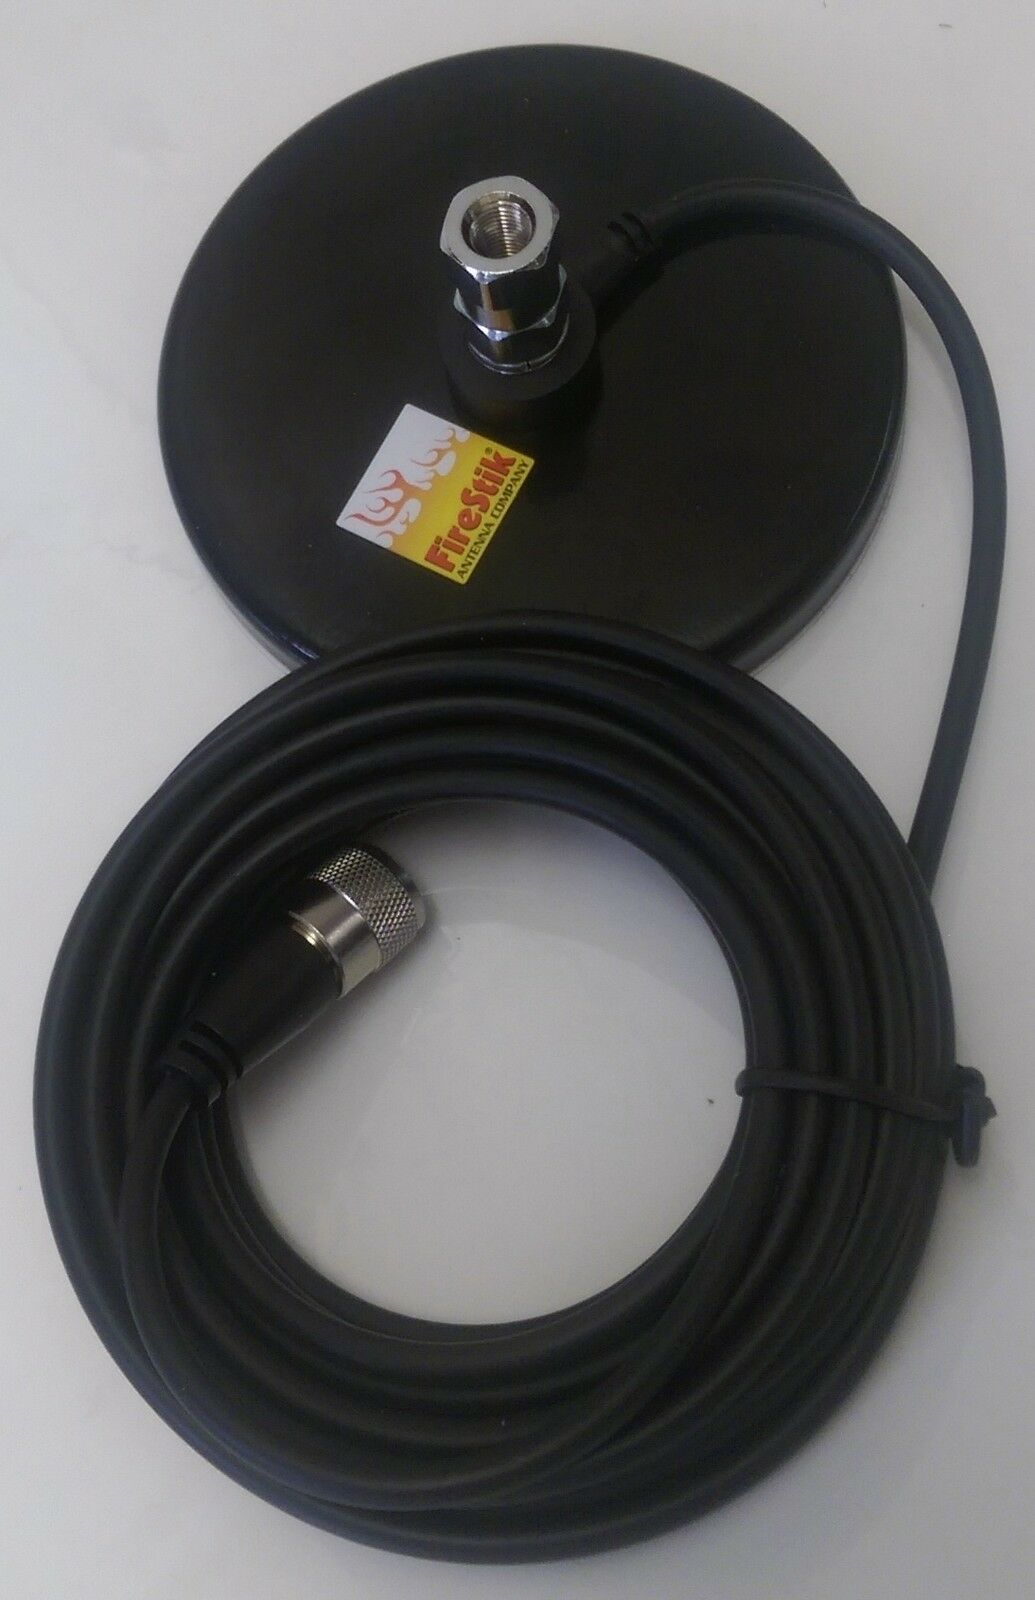 Firestik K-11 Heavy-duty Magnetic Cb Radio Antenna Mag Mount W 18 Ft Coax Cable